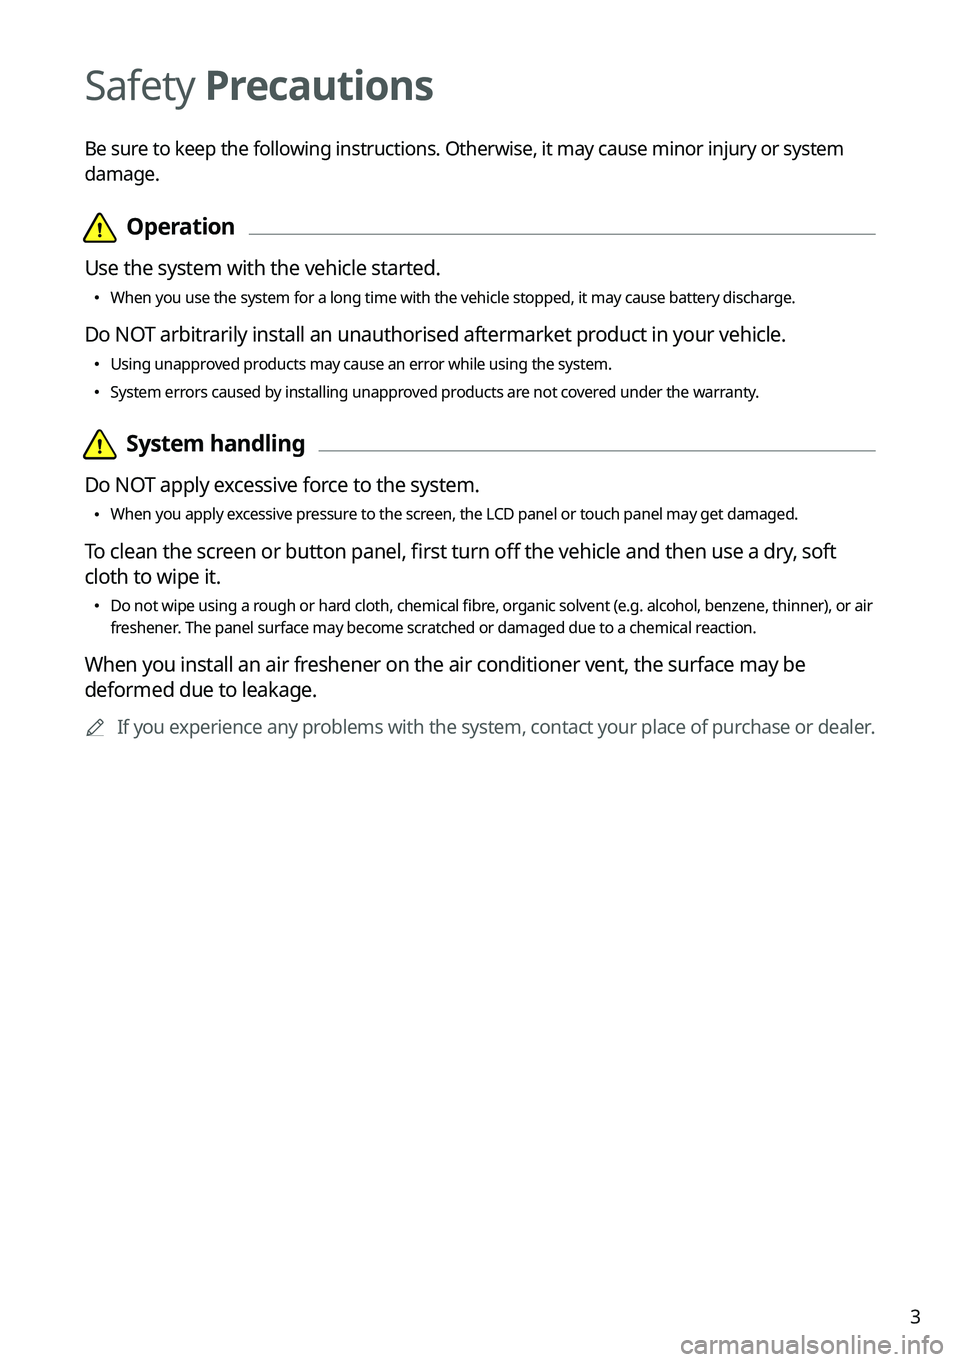 KIA CARNIVAL 2023  Navigation System Quick Reference Guide 3
Safety Precautions
Be sure to keep the following instructions. Otherwise, it may cause minor injury or system 
damage. 
  